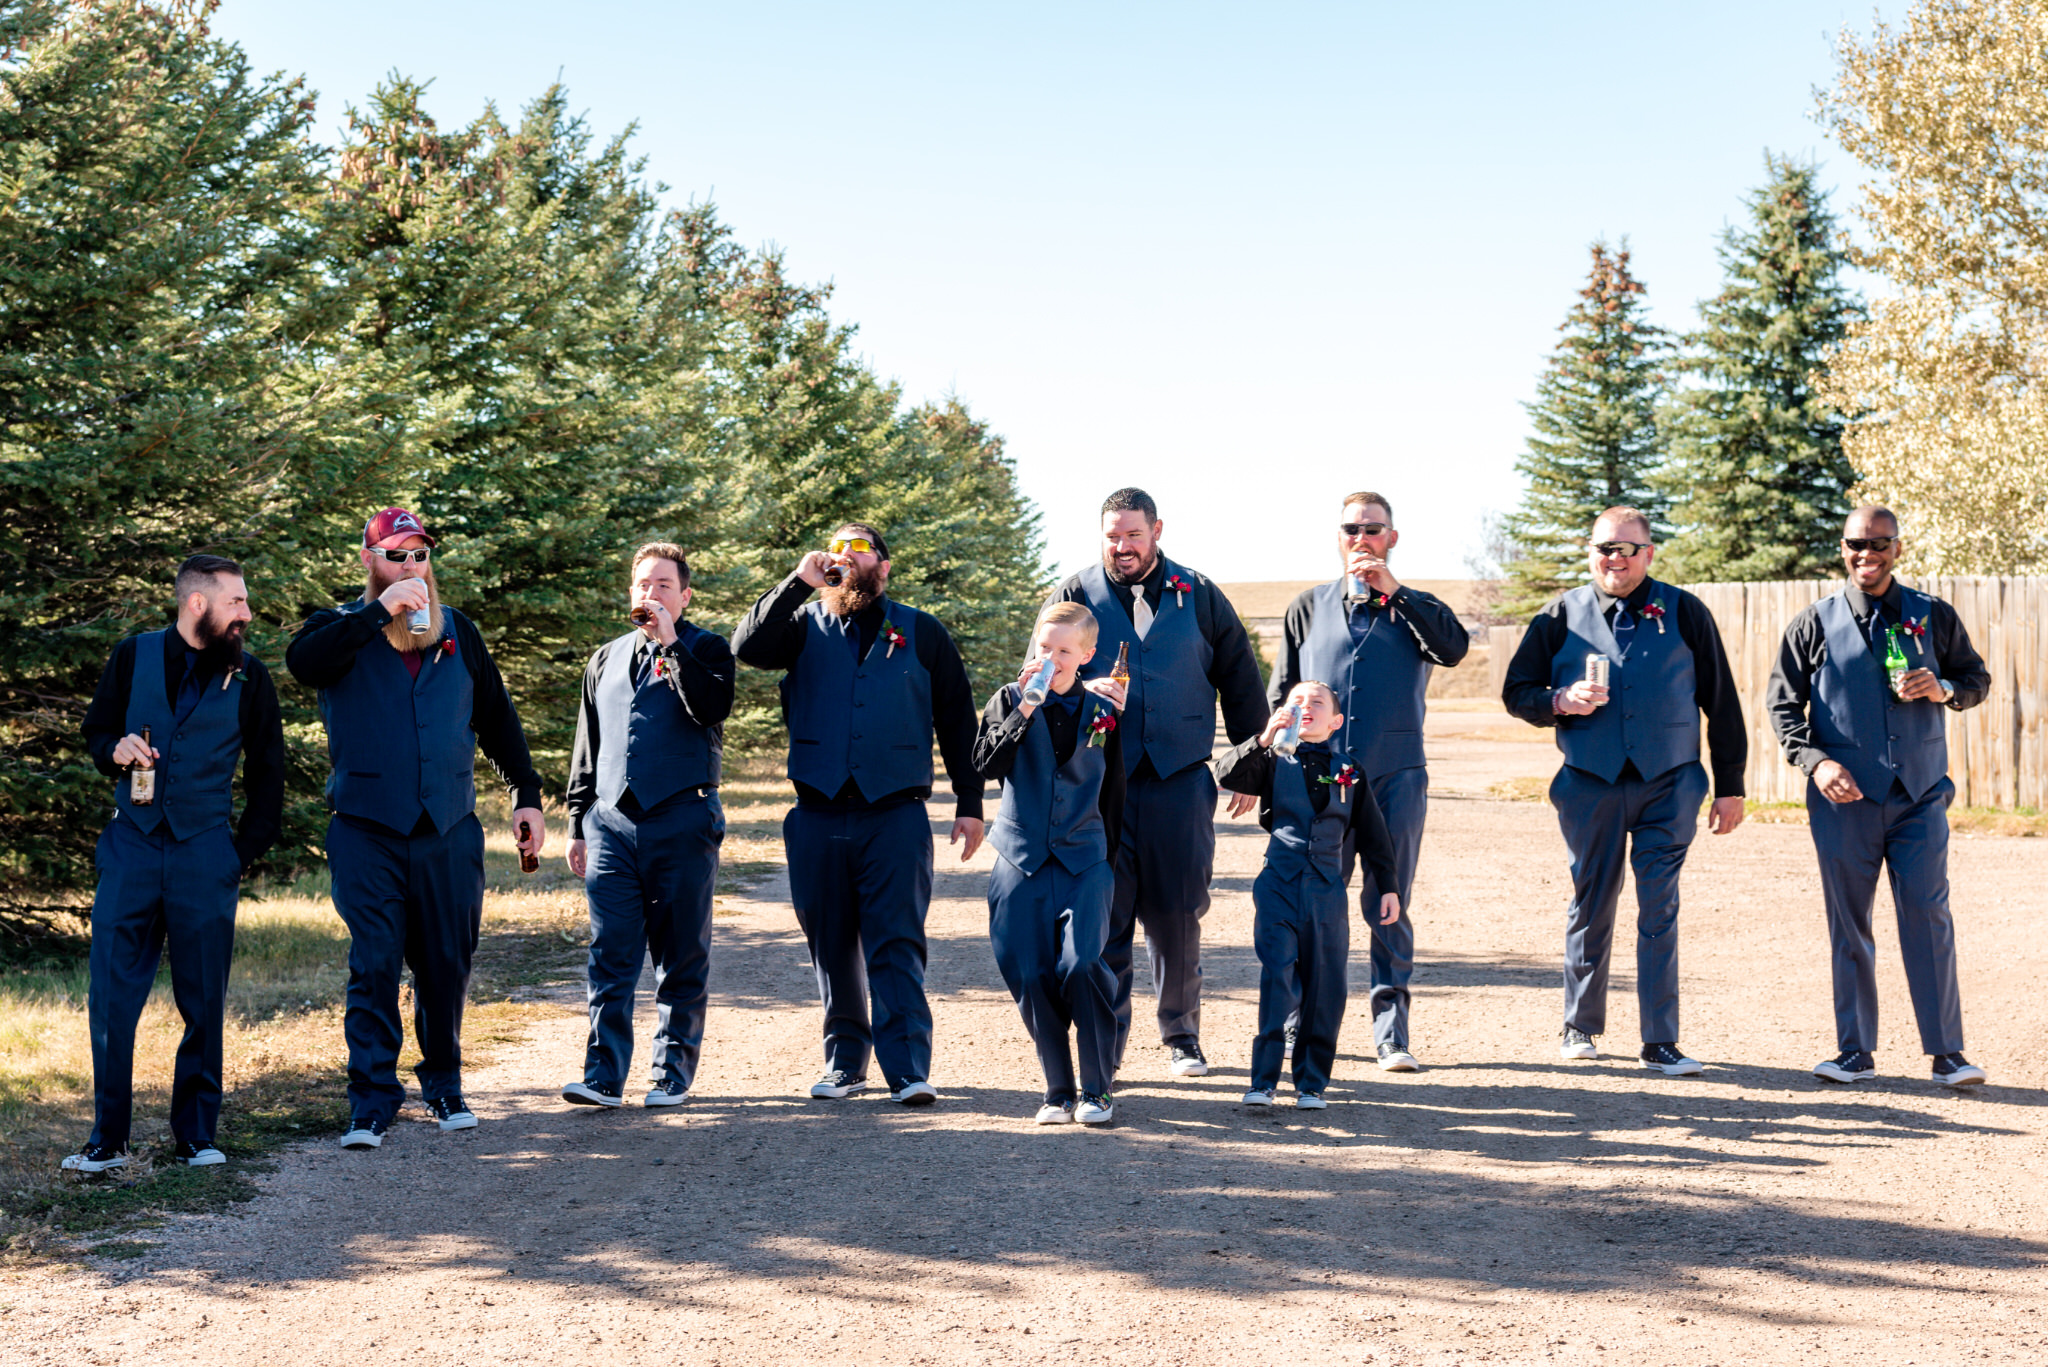 The groom and groomsmen enjoying some drinks. Briana and Kevin's Terry Bison Ranch Wedding by Wyoming Wedding Photographer Jennifer Garza, Wyoming Wedding, Wyoming Wedding Photographer, Wyoming Engagement Photographer, Wyoming Bride, Couples Goals, Wyoming Wedding, Wedding Photographer, Wyoming Photographer, Wyoming Wedding Photography, Wedding Inspiration, Destination Wedding Photographer, Fall Wedding, Ranch Wedding, Rustic Wedding Inspiration, Wedding Dress Inspo